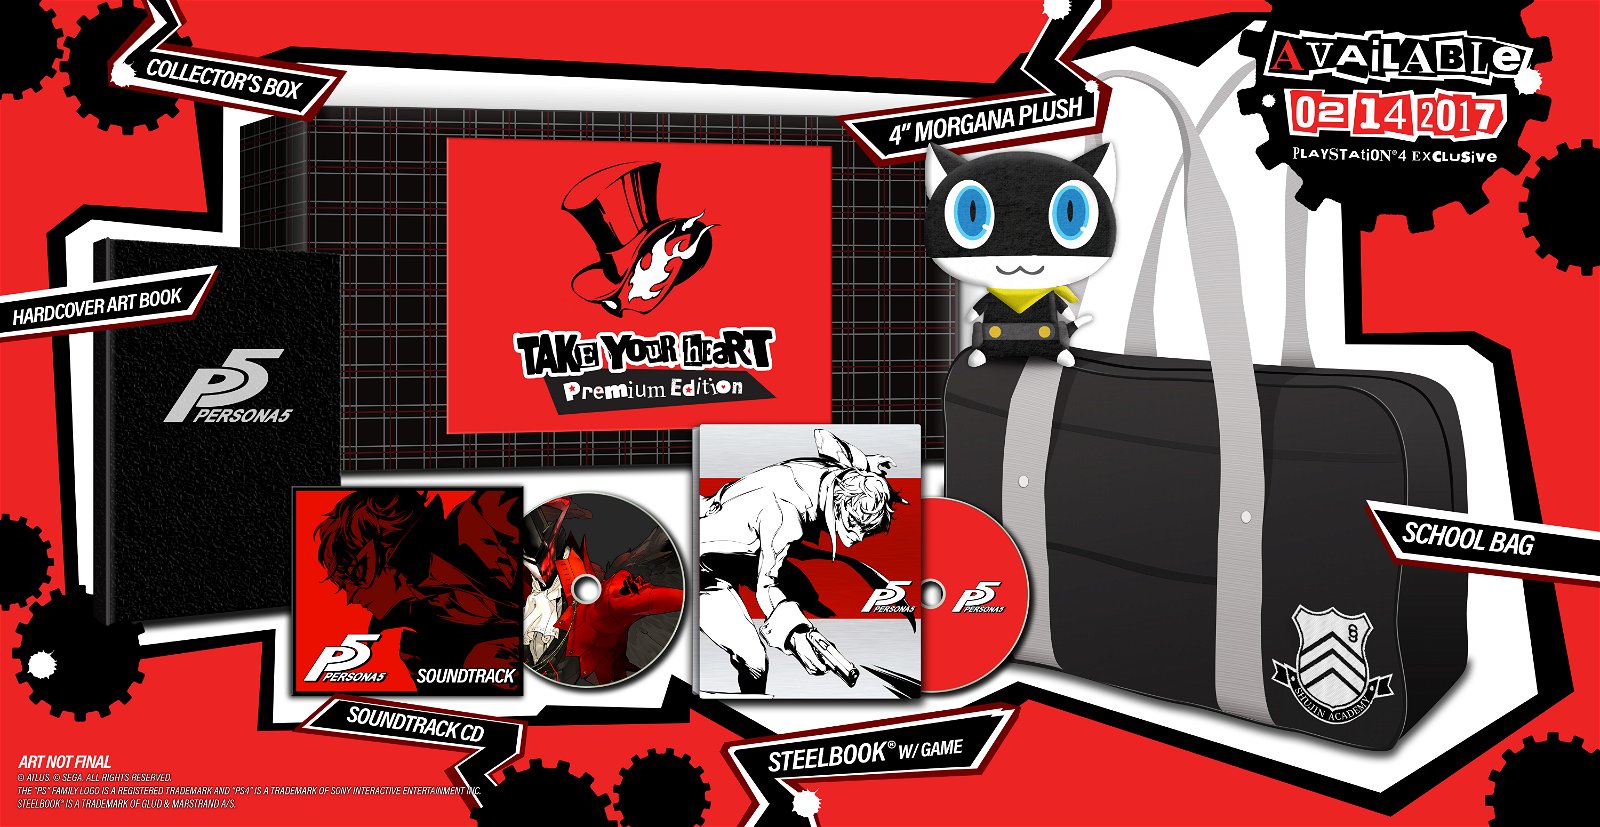 Atlus To Launch Persona 5 In North America In February 2017